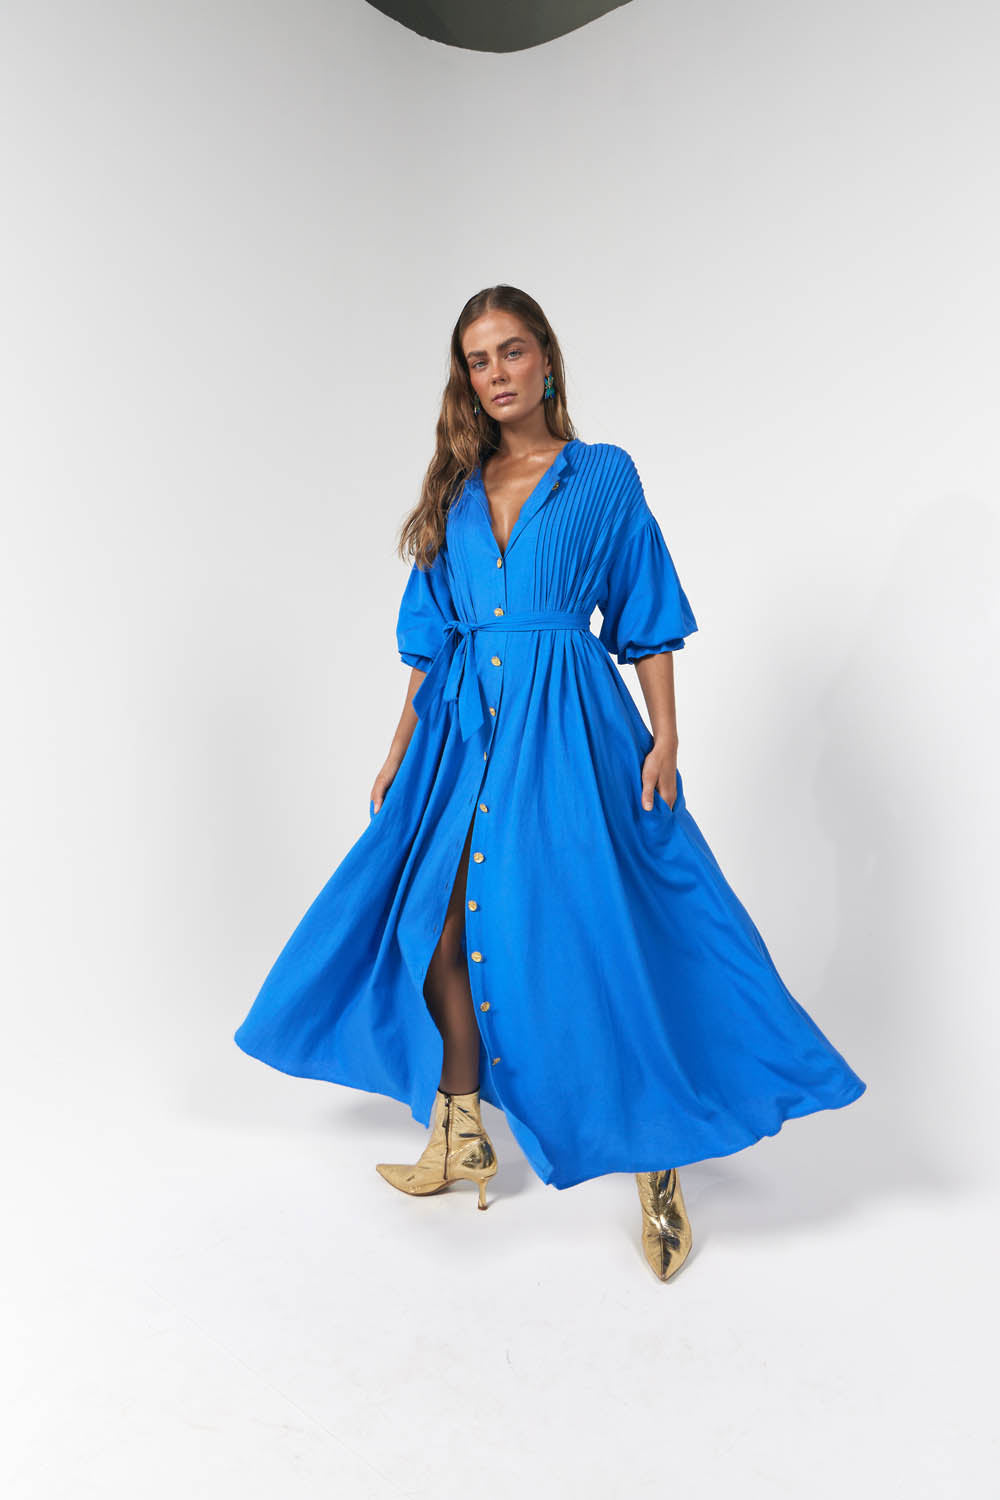 Model wearing blue maxi dress with gold buttons and puff sleeves